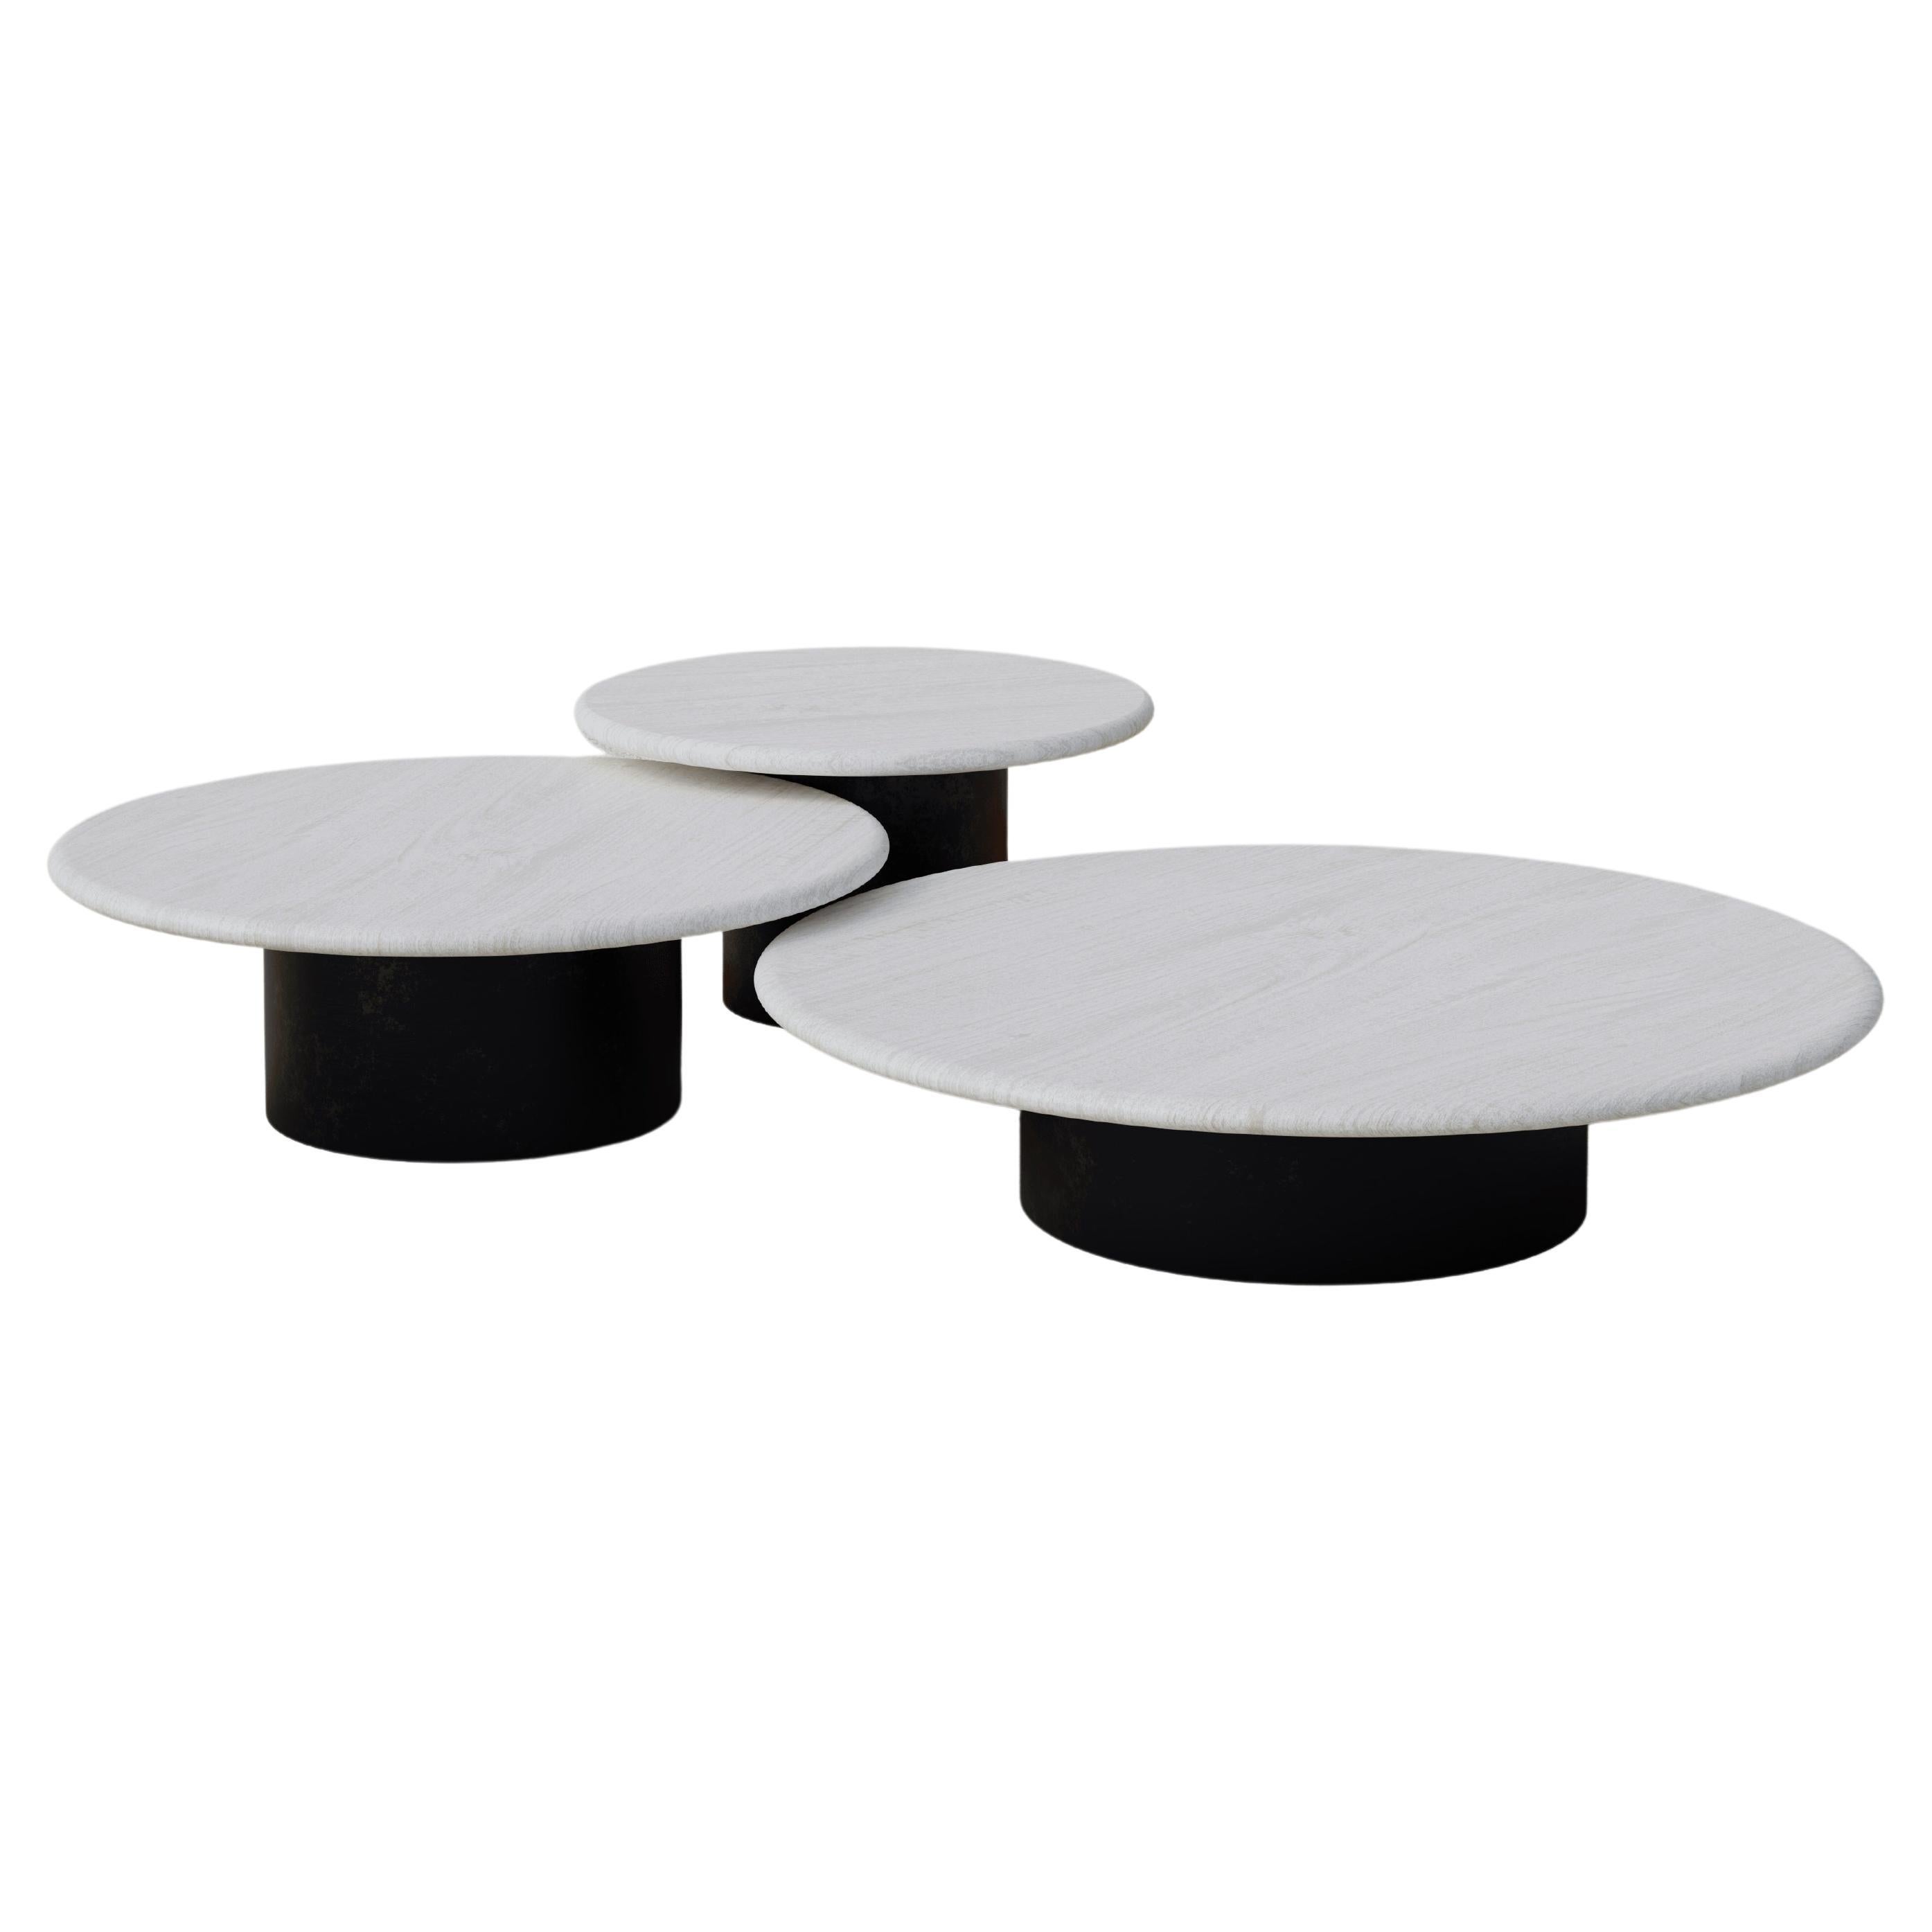 Raindrop Coffee Table Set, 600, 800, 1000, White Oak / Patinated For Sale